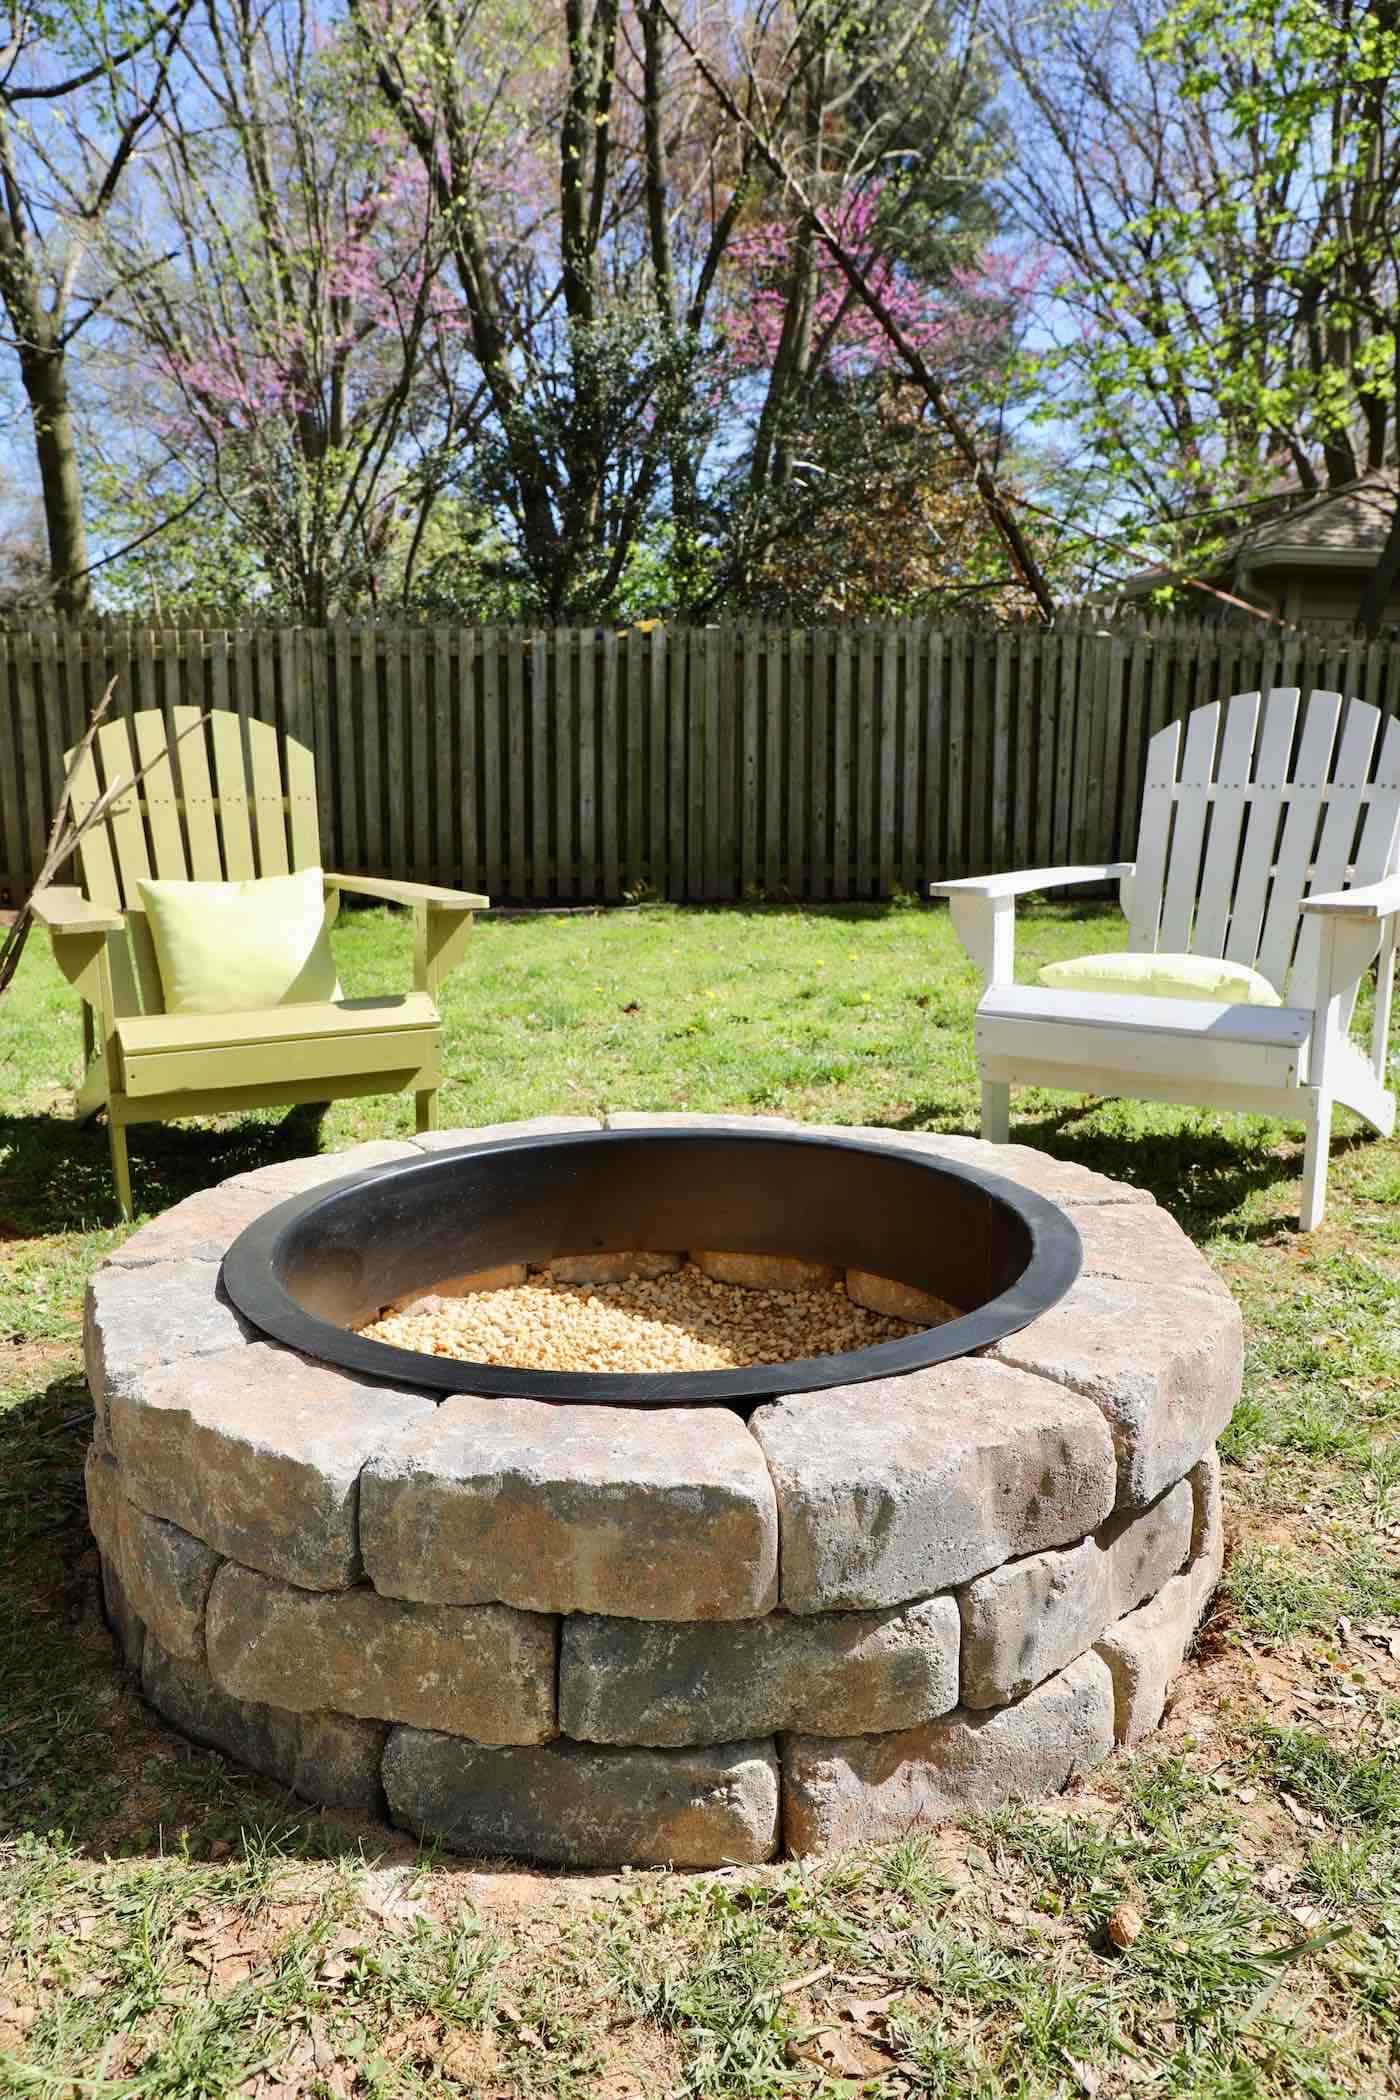 Diy Fire Pit With Gravel Stones, How To Lay Pavers For Fire Pit